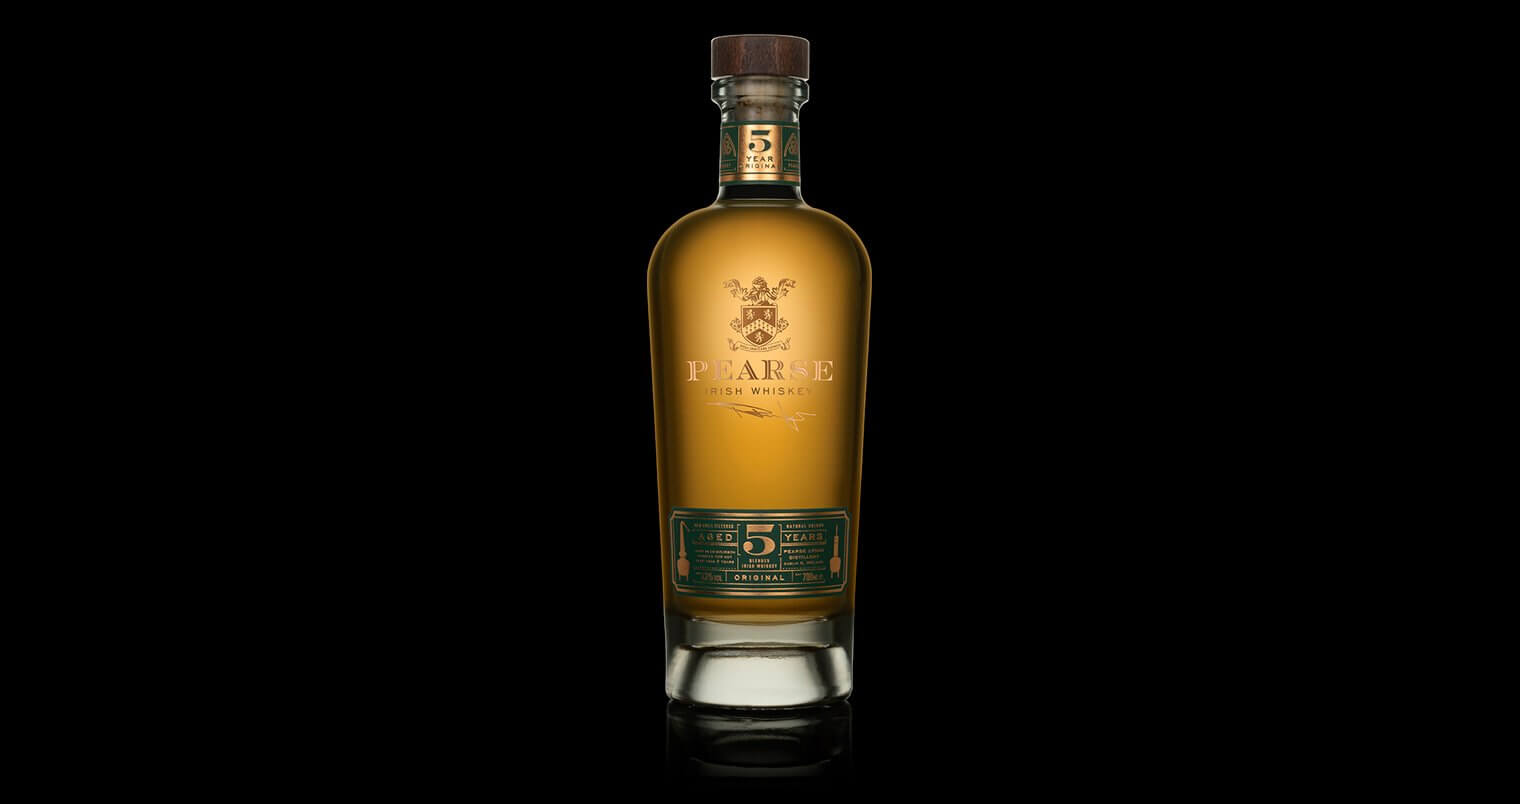 Pearse Lyons Five-Year-Old Single Malt, bottle on black background, featured image